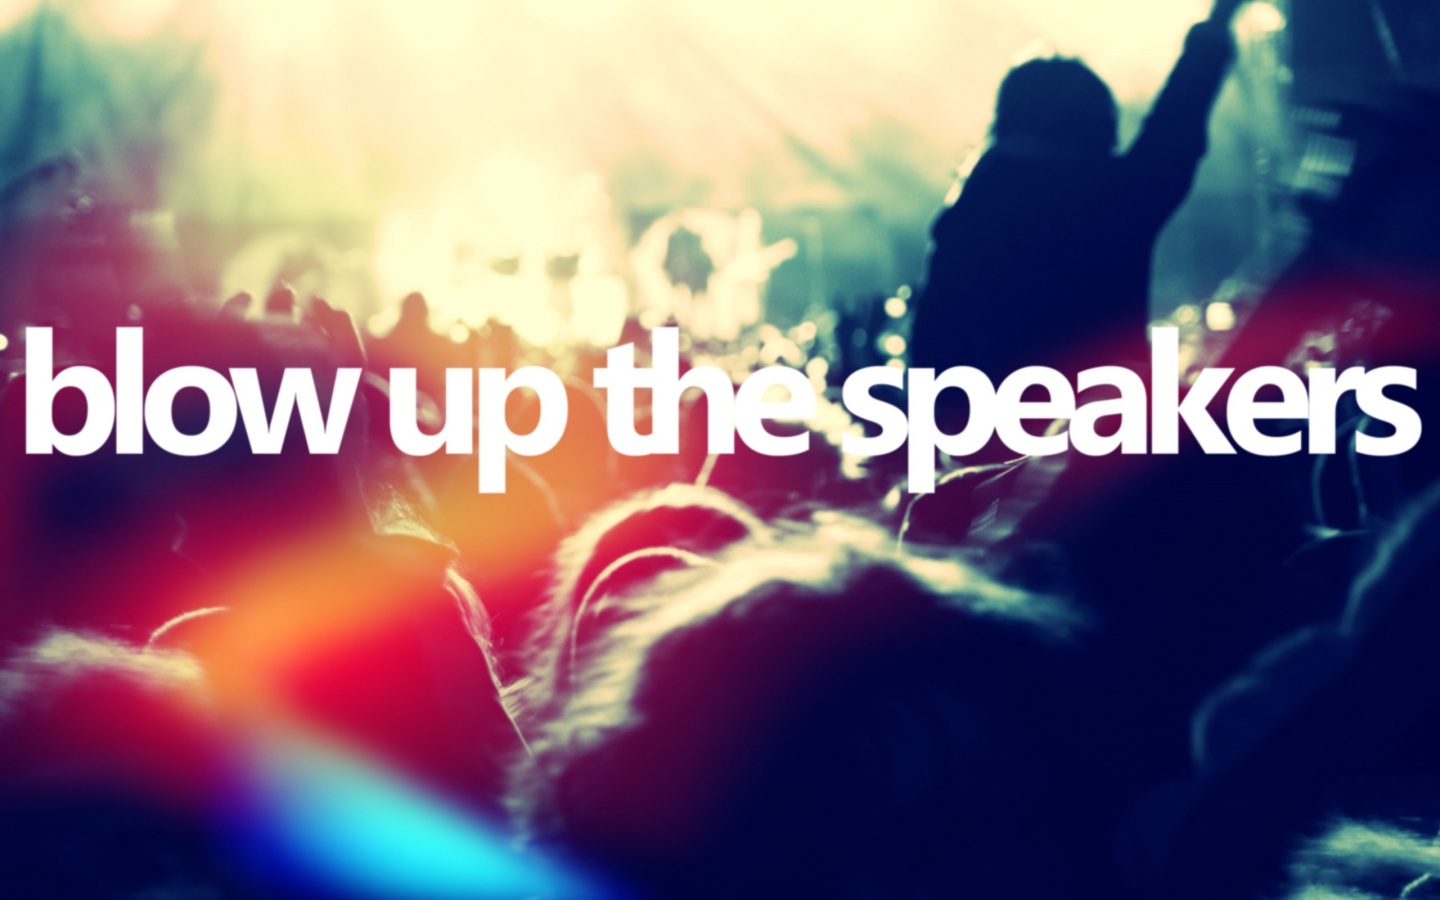 Blow up the speakers обои